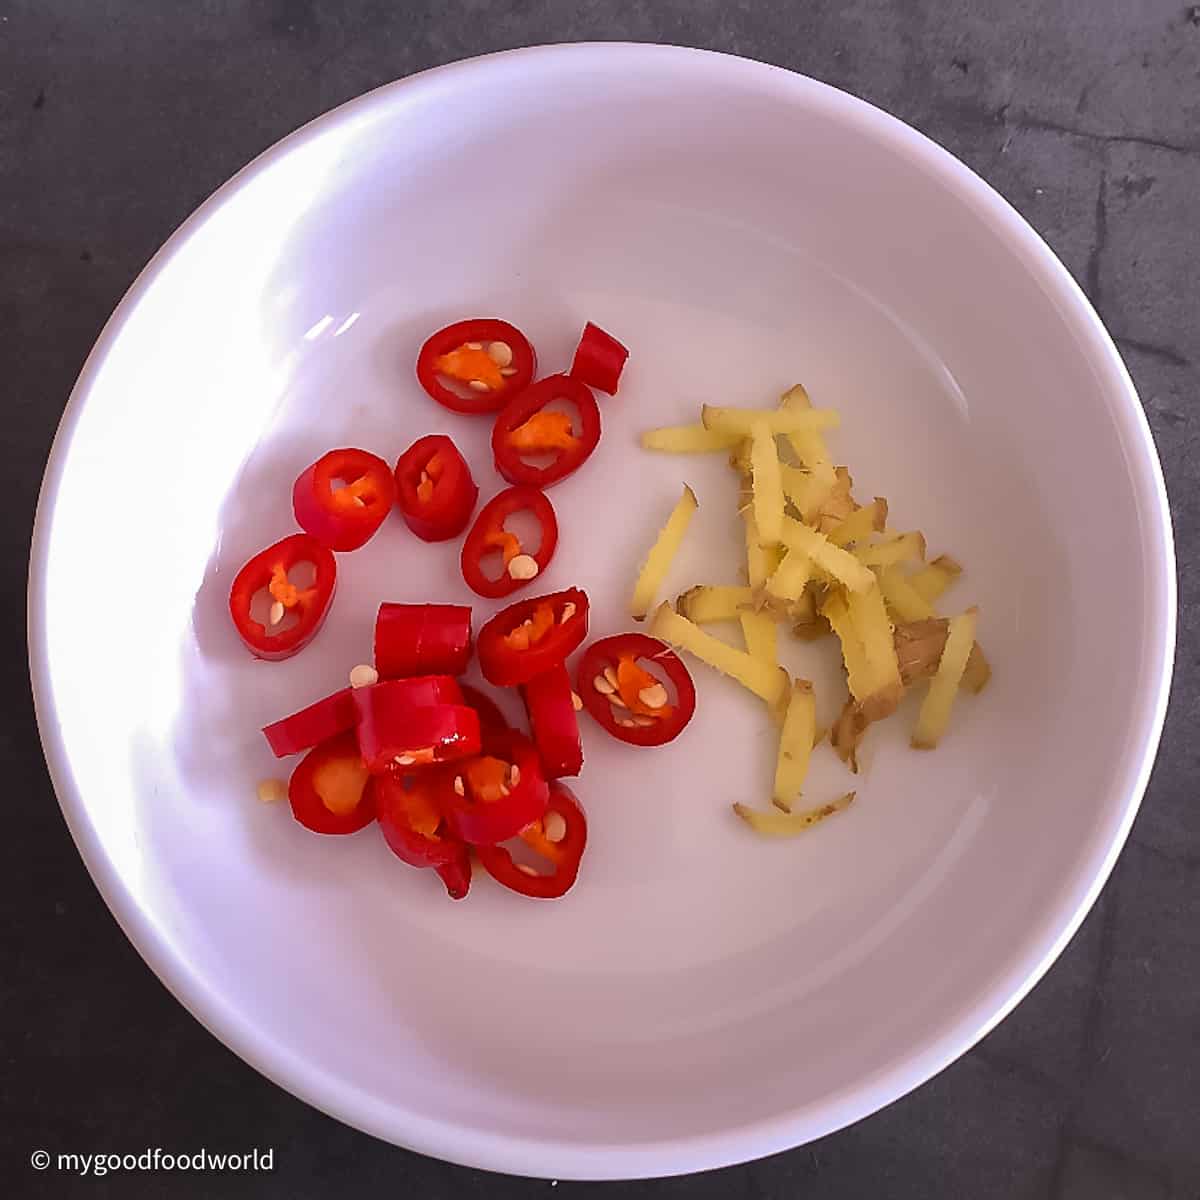 Chopped ginger and fresh red chili pepper are placed in a round white bowl.